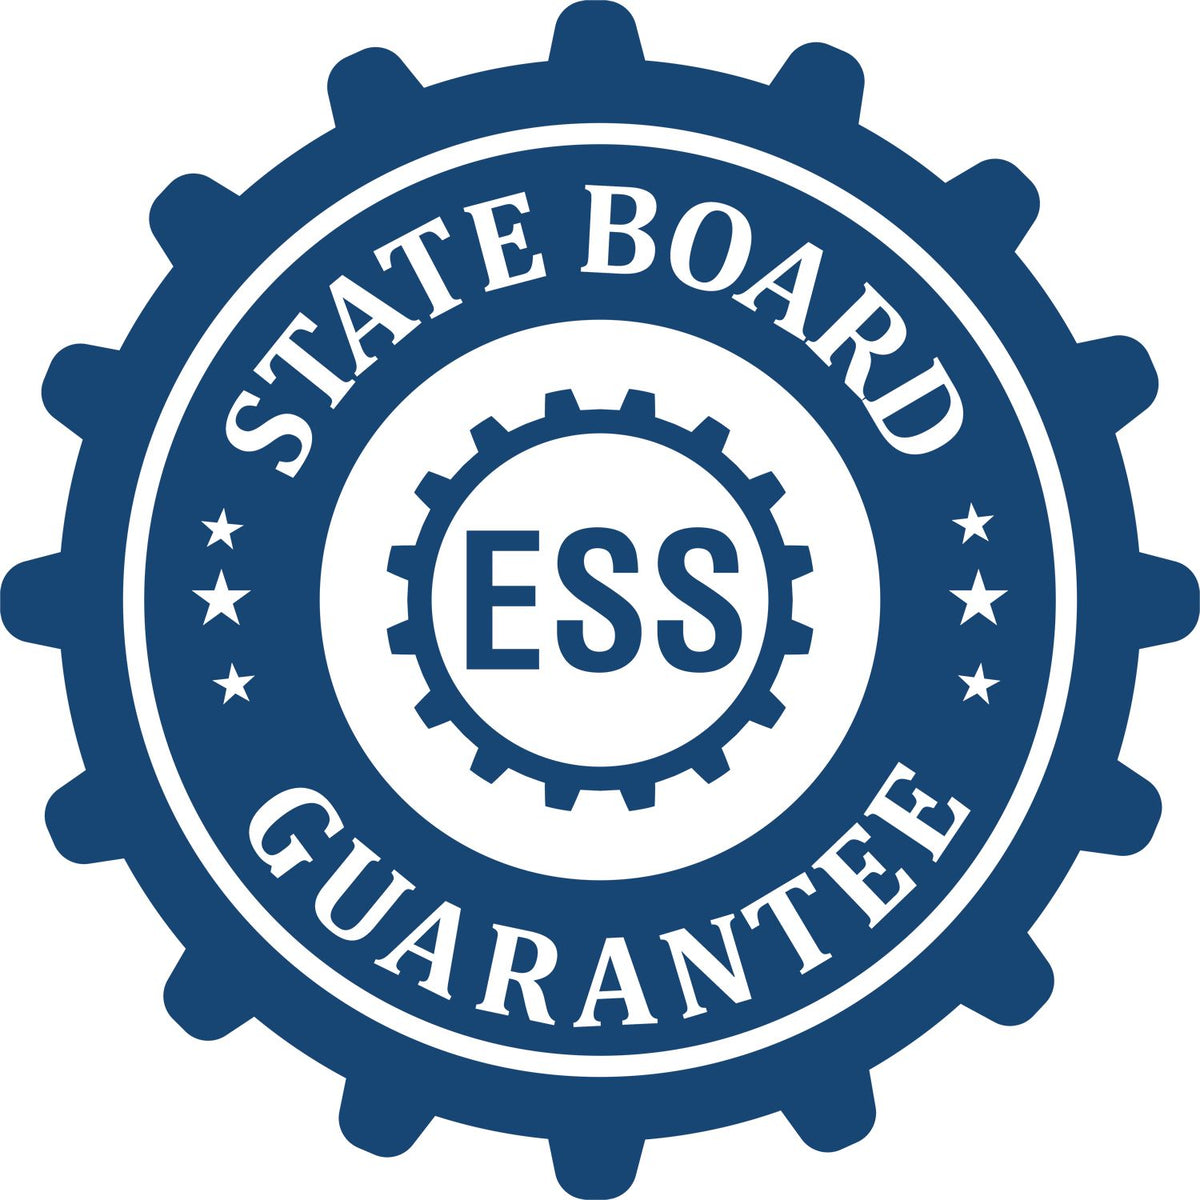 An emblem in a gear shape illustrating a state board guarantee for the Wooden Handle Minnesota State Seal Notary Public Stamp product.